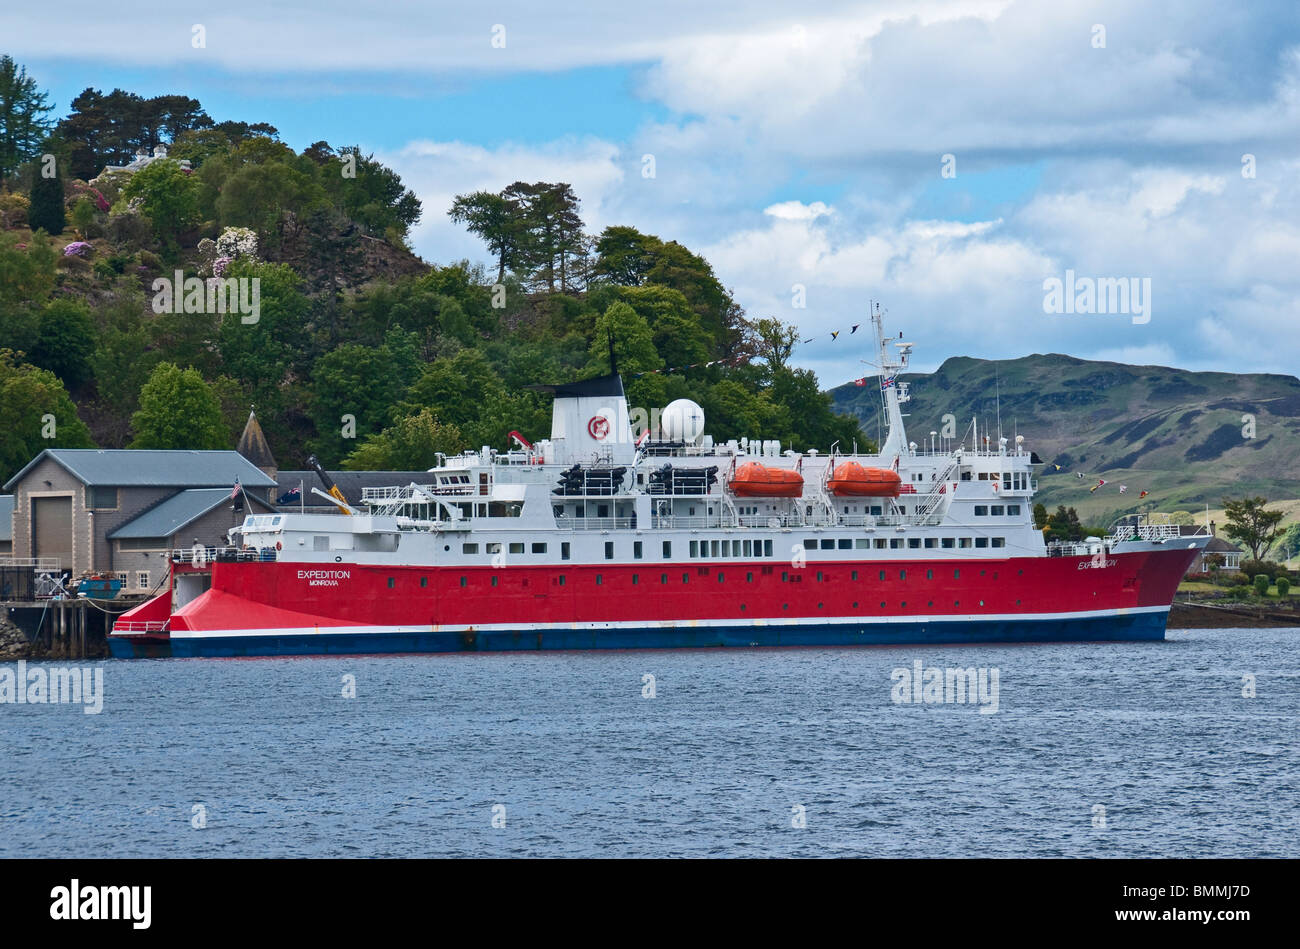 Cruise Ship MS Expedition moored in Oban Lorn Scotland Stock Photo